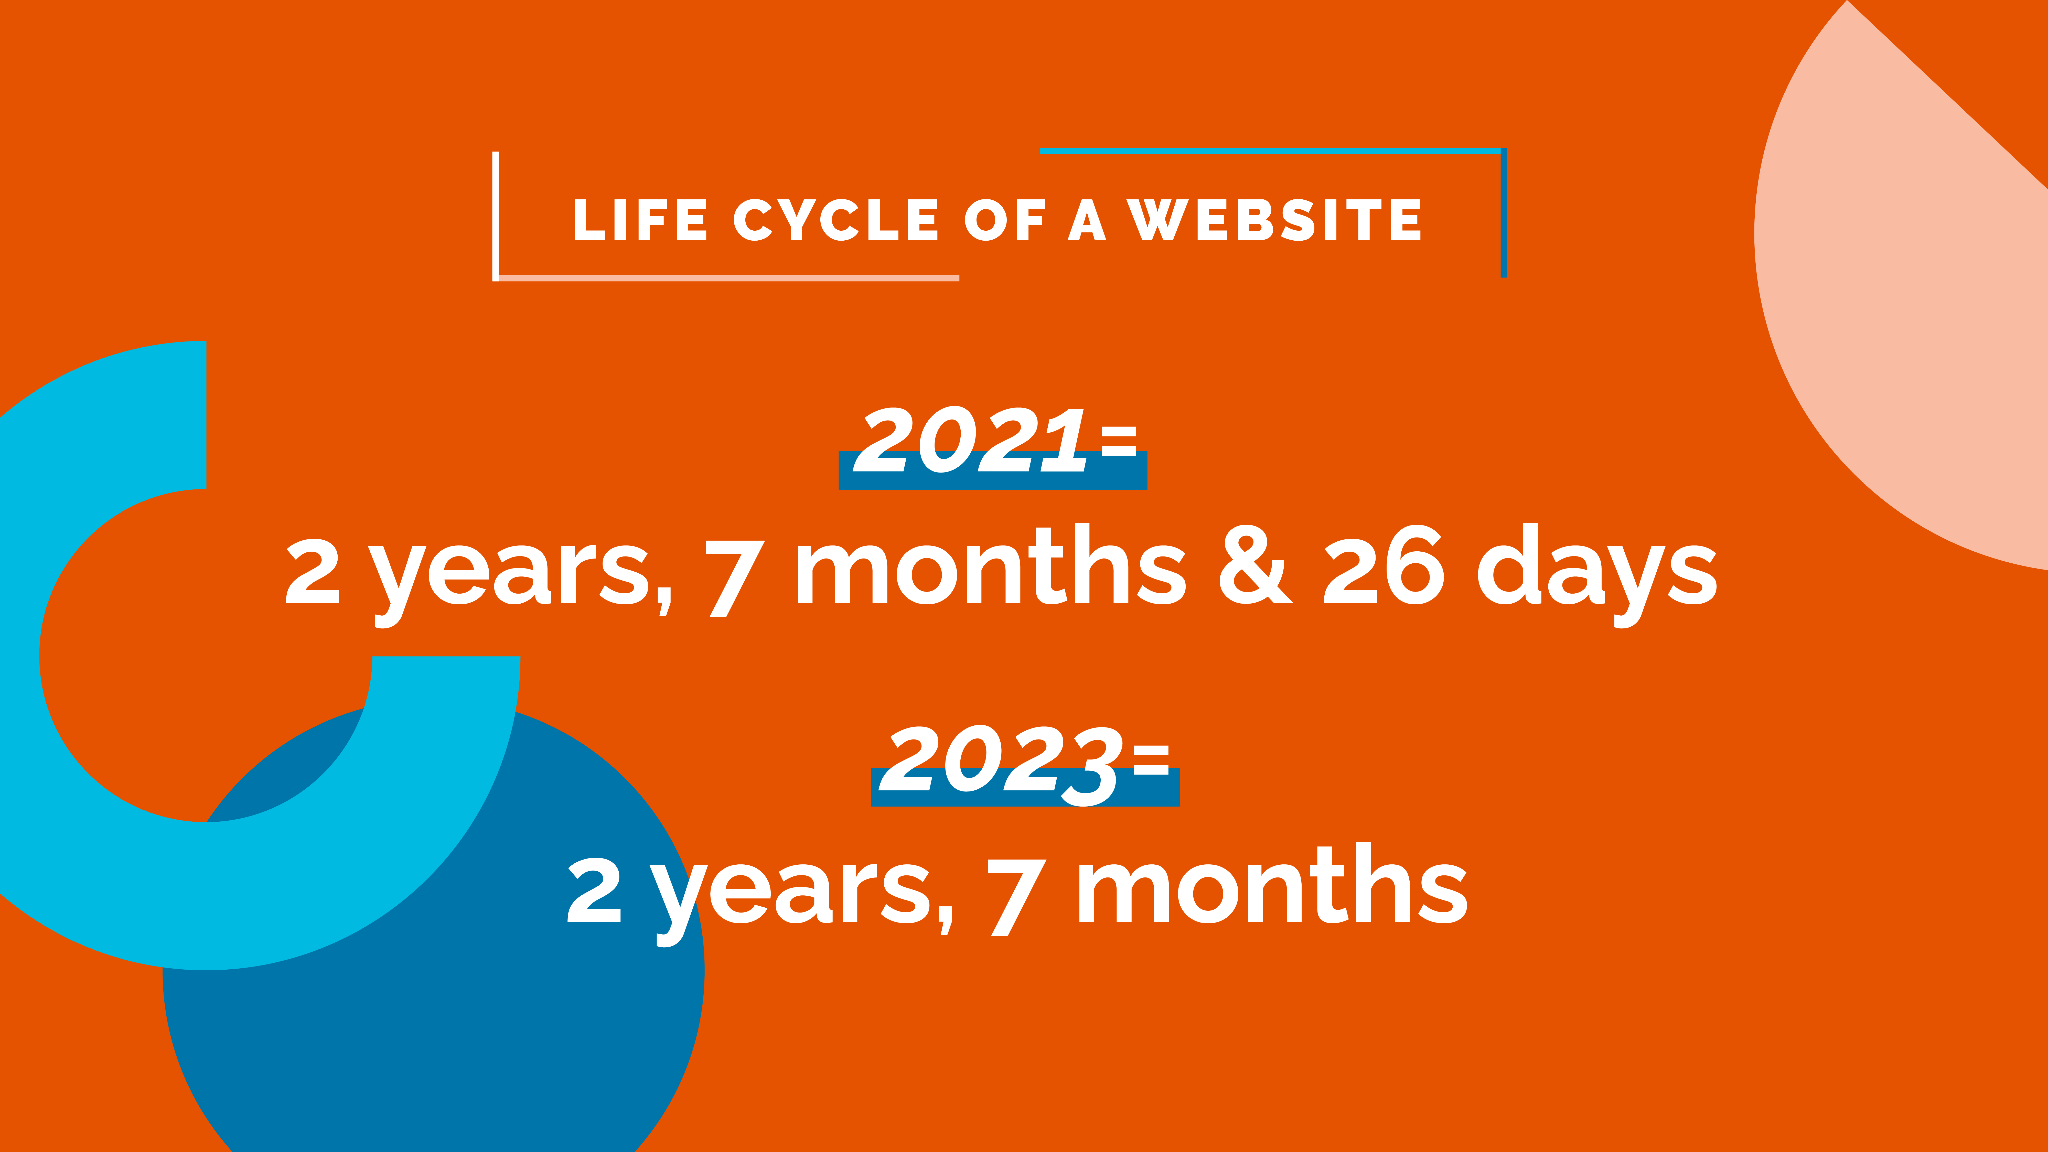 LIfe Cycle of a Website